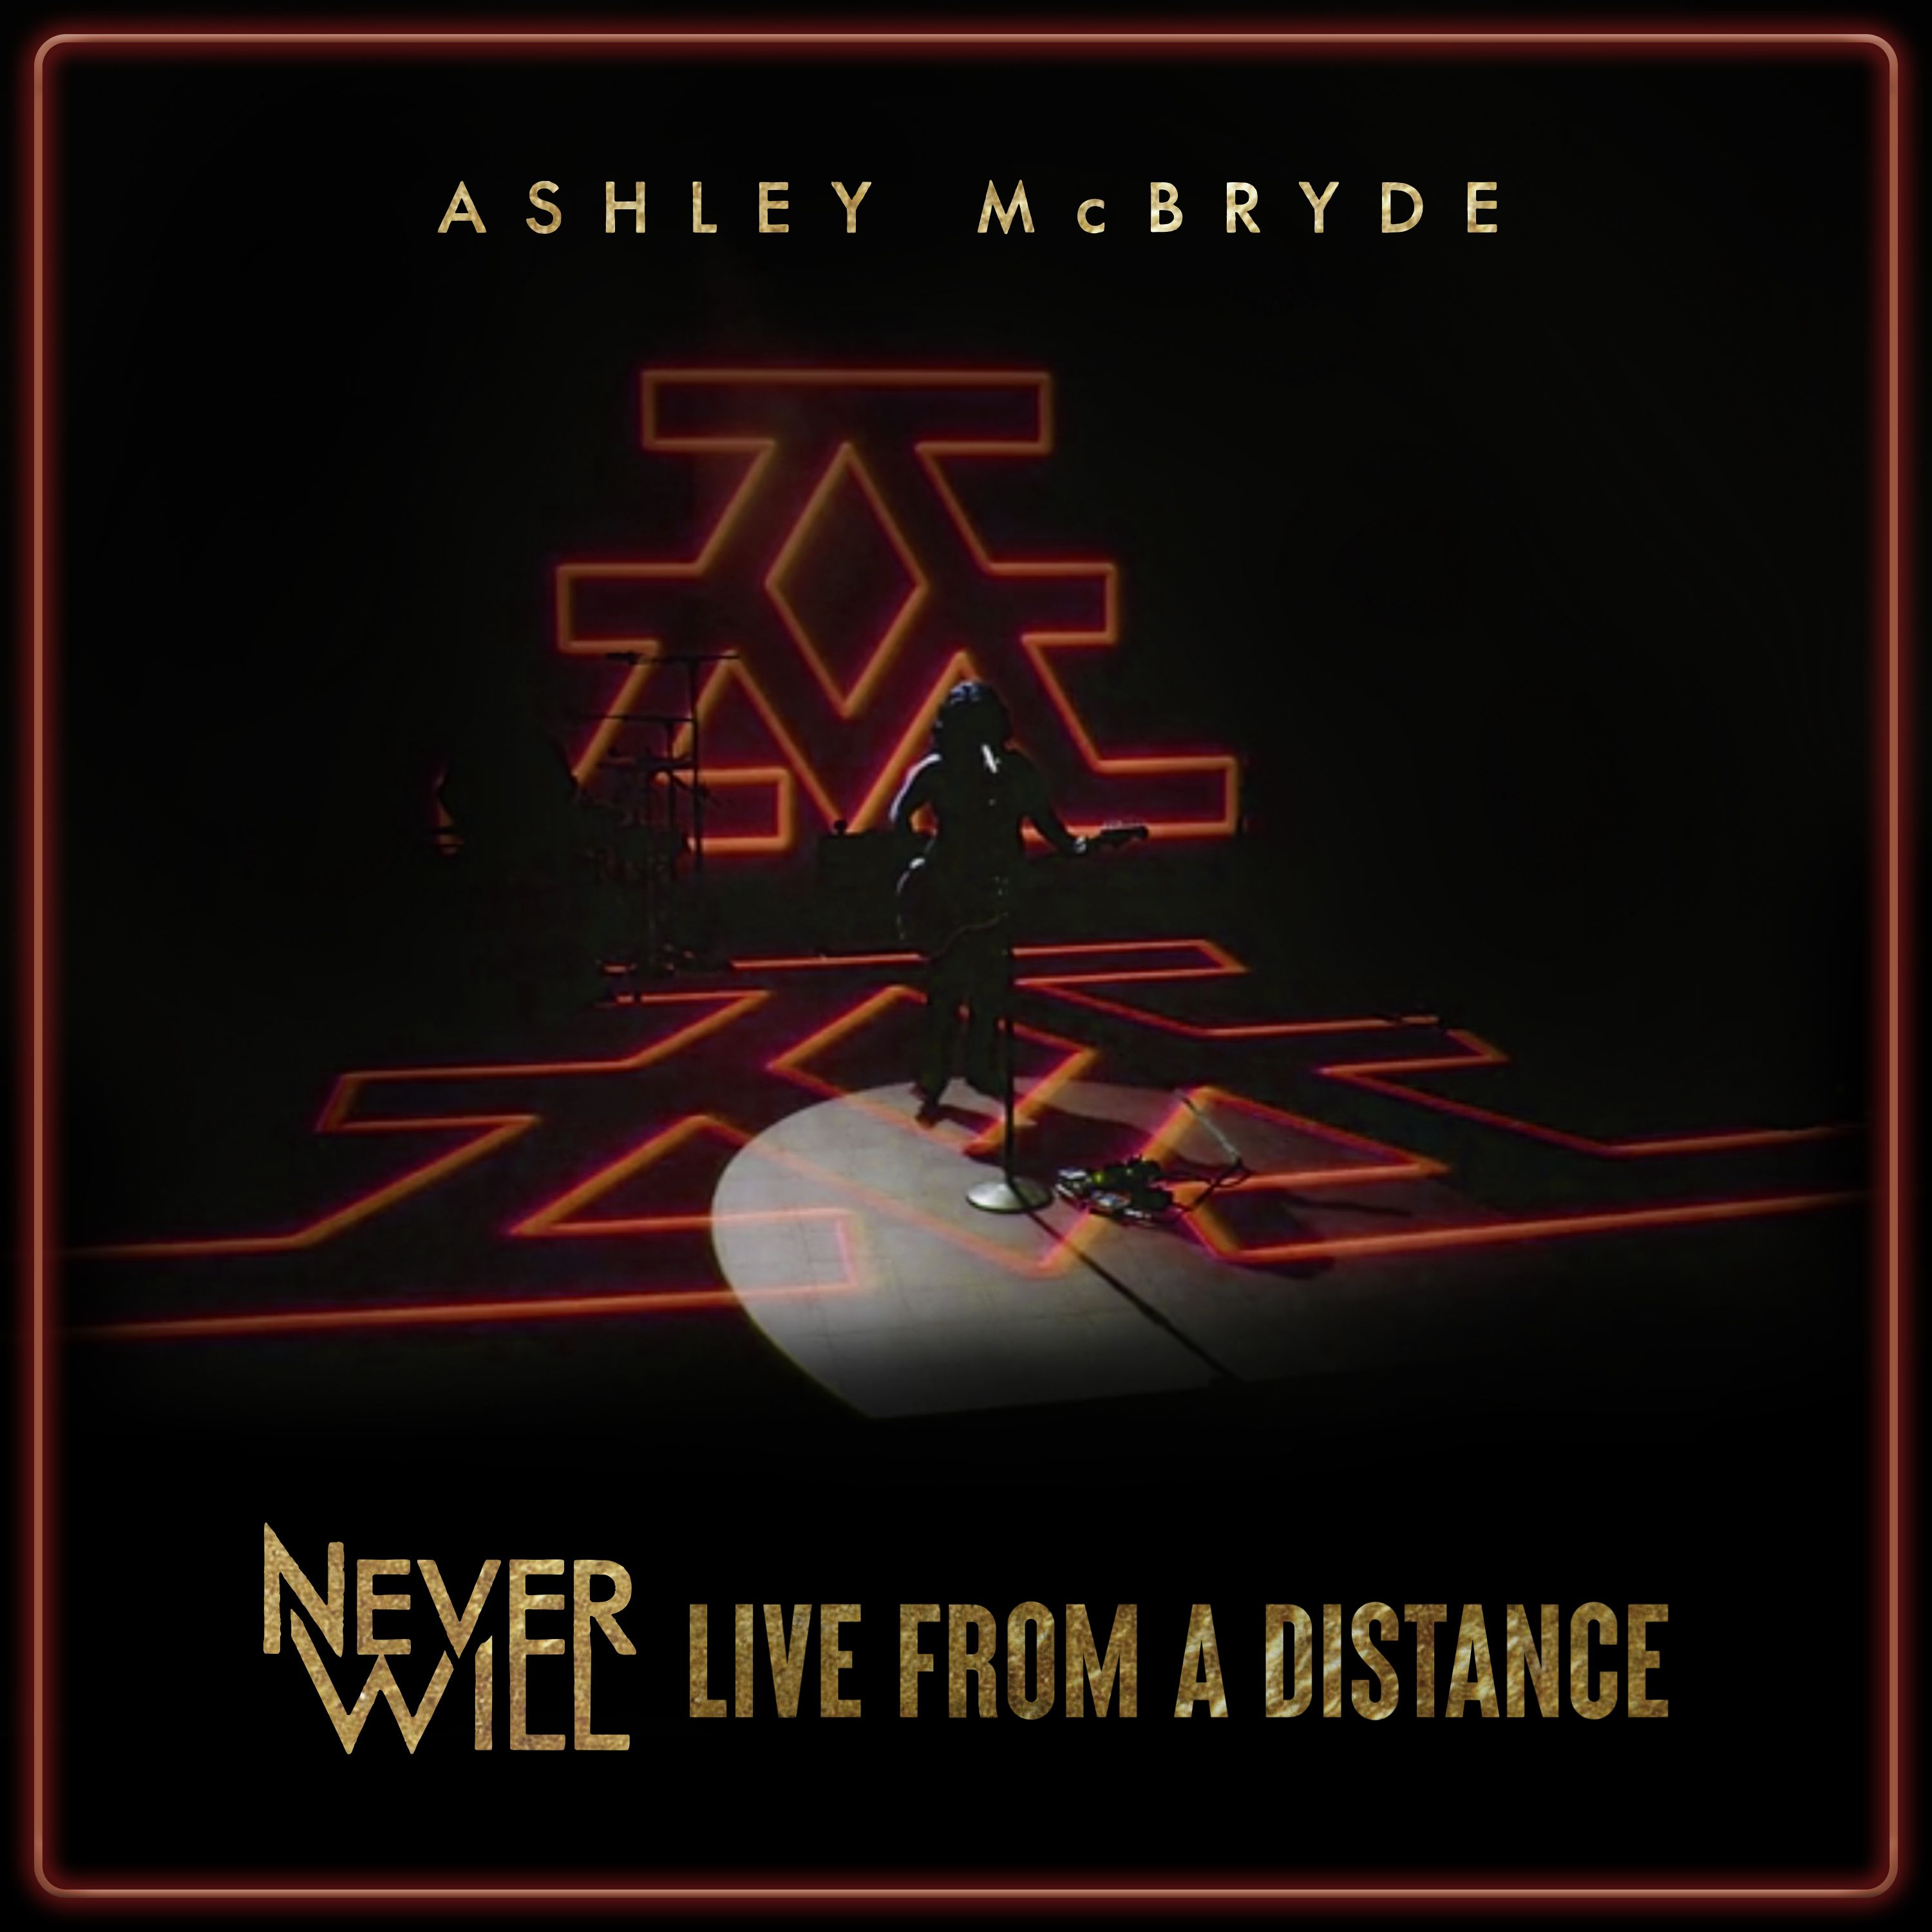 ASHLEY MCBRYDE COMPLETES NEW EP 'NEVER WILL: LIVE FROM A DISTANCE'